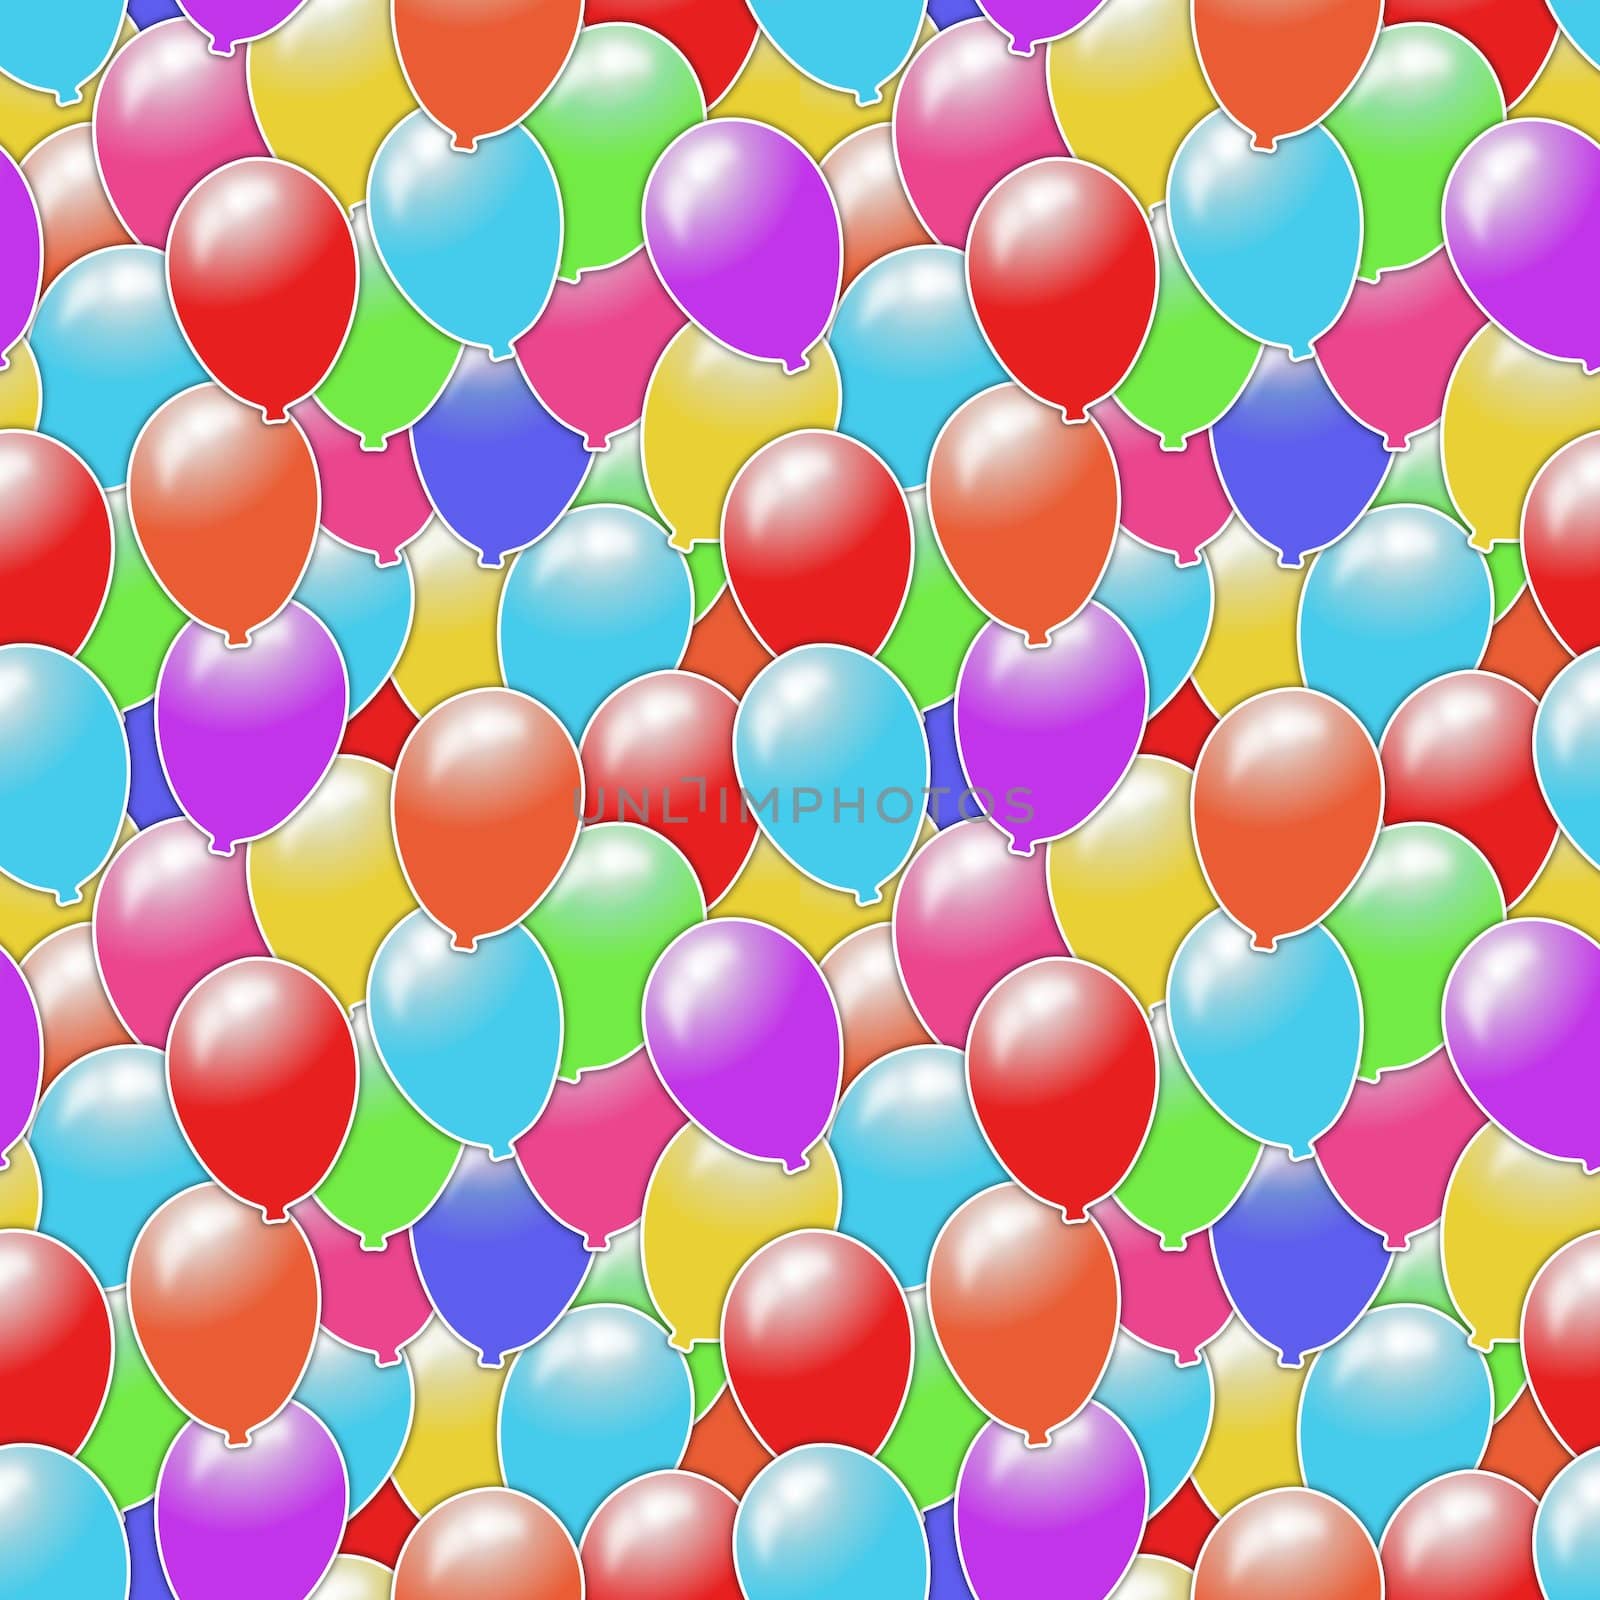 Seamless background made of colorful balloons